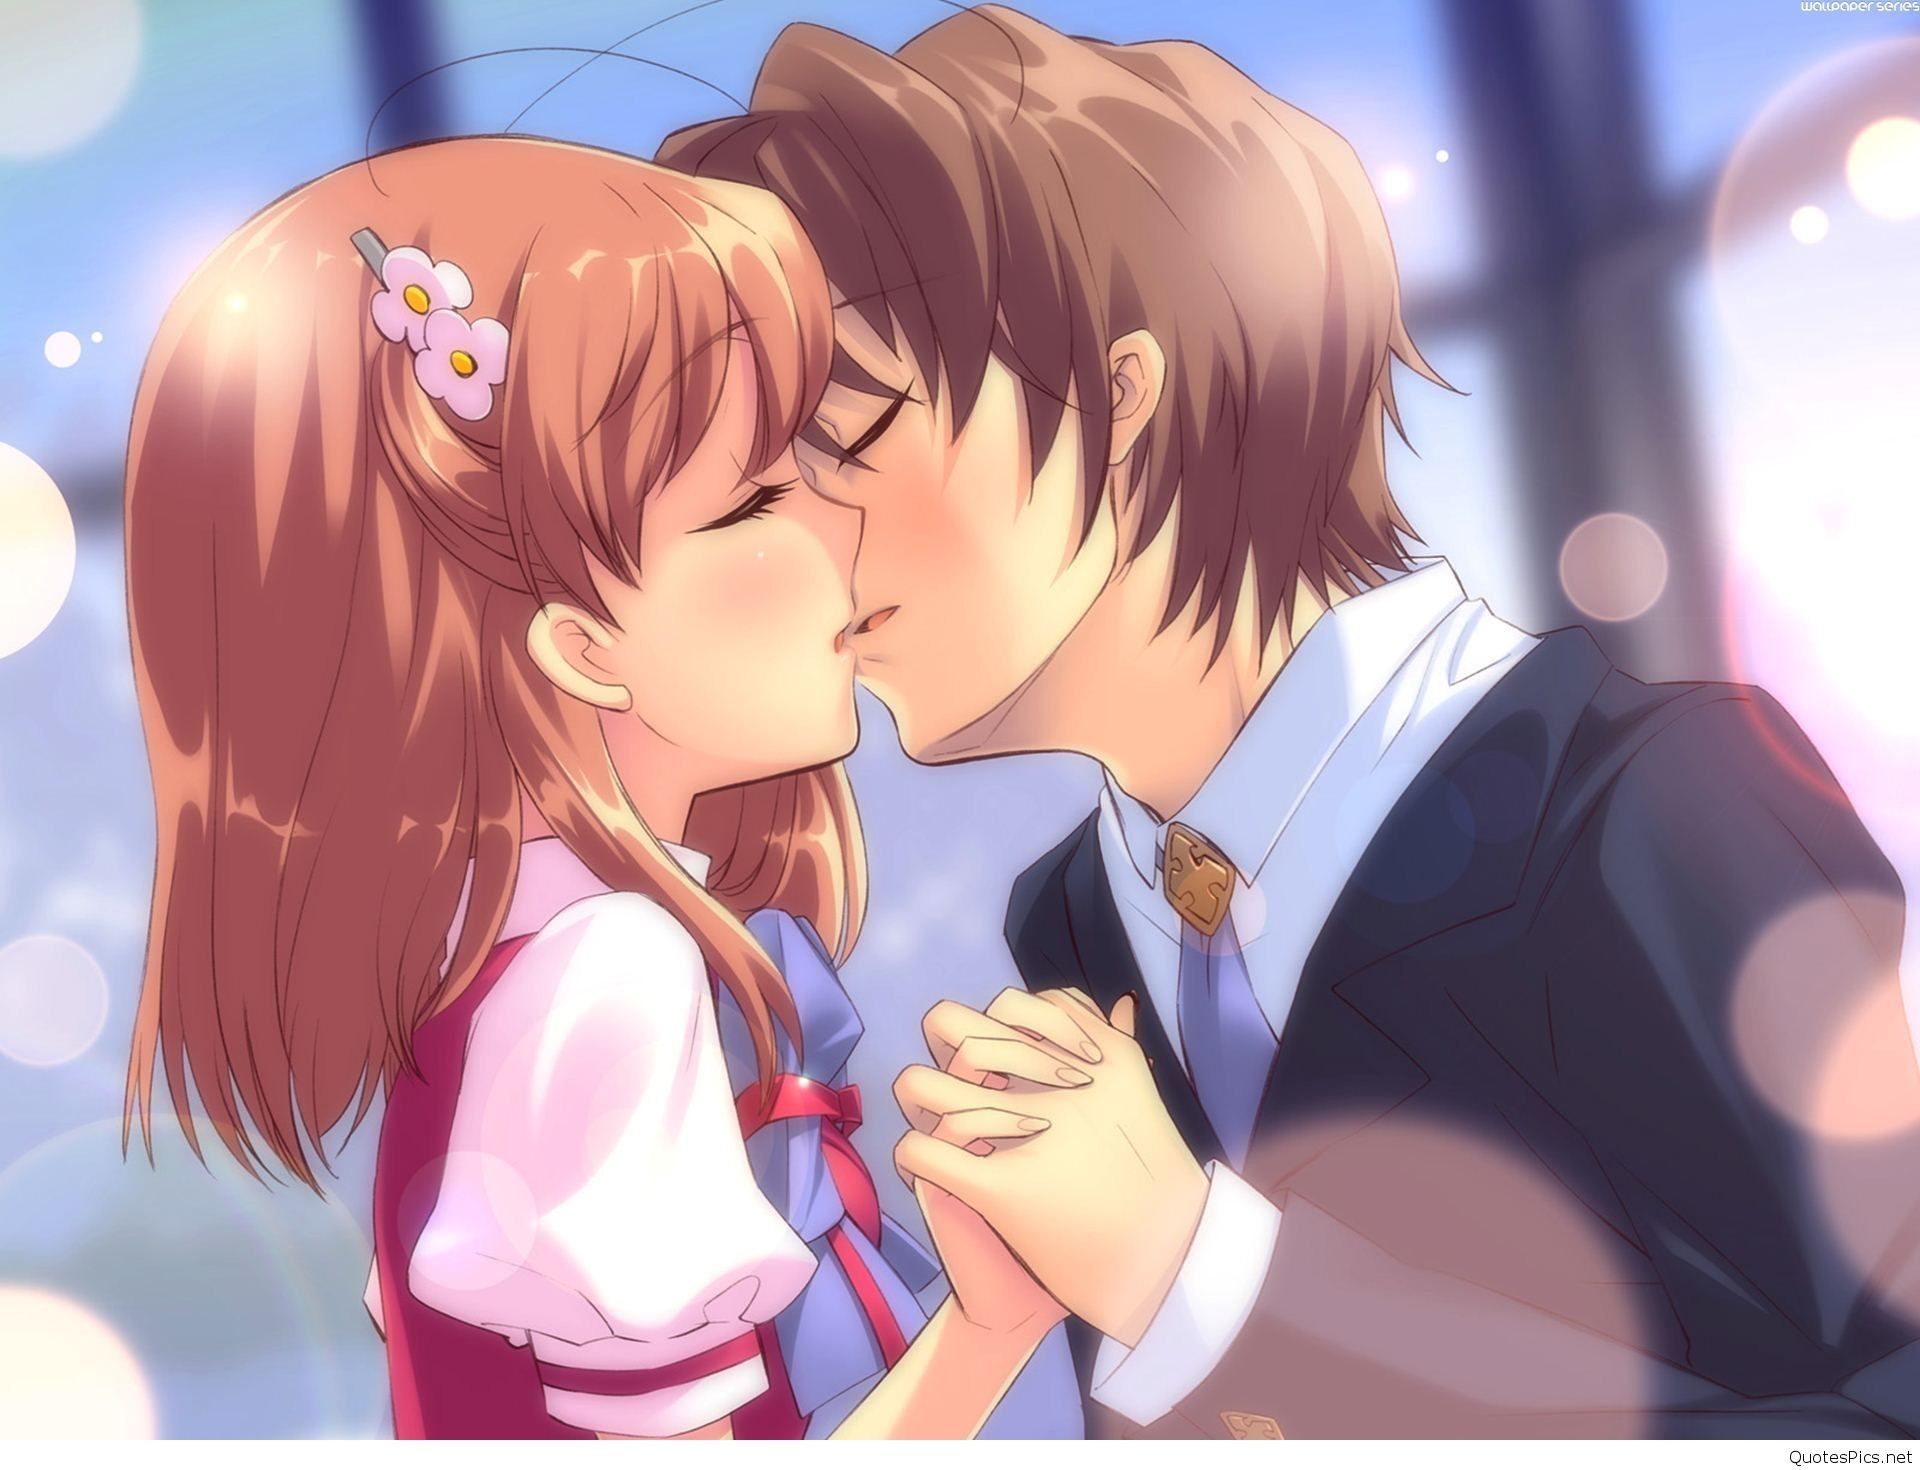 Anime Sweet Kissing Couple Wallpapers - Wallpaper Cave